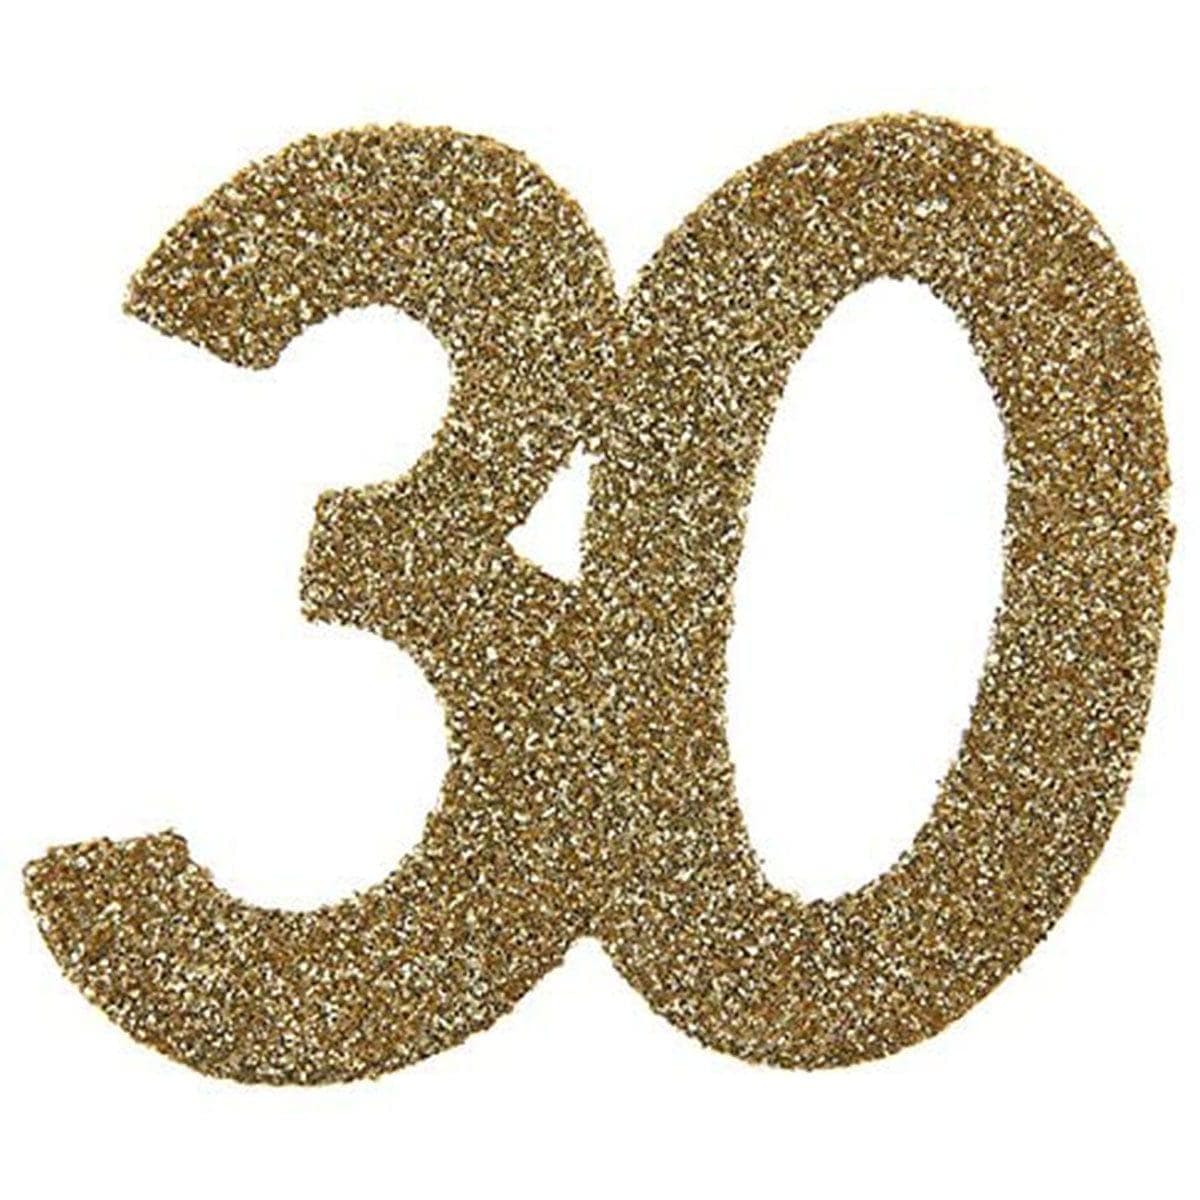 SANTEX Age Specific Birthday Glittery Number 30 Decoration, Gold, 6 Count